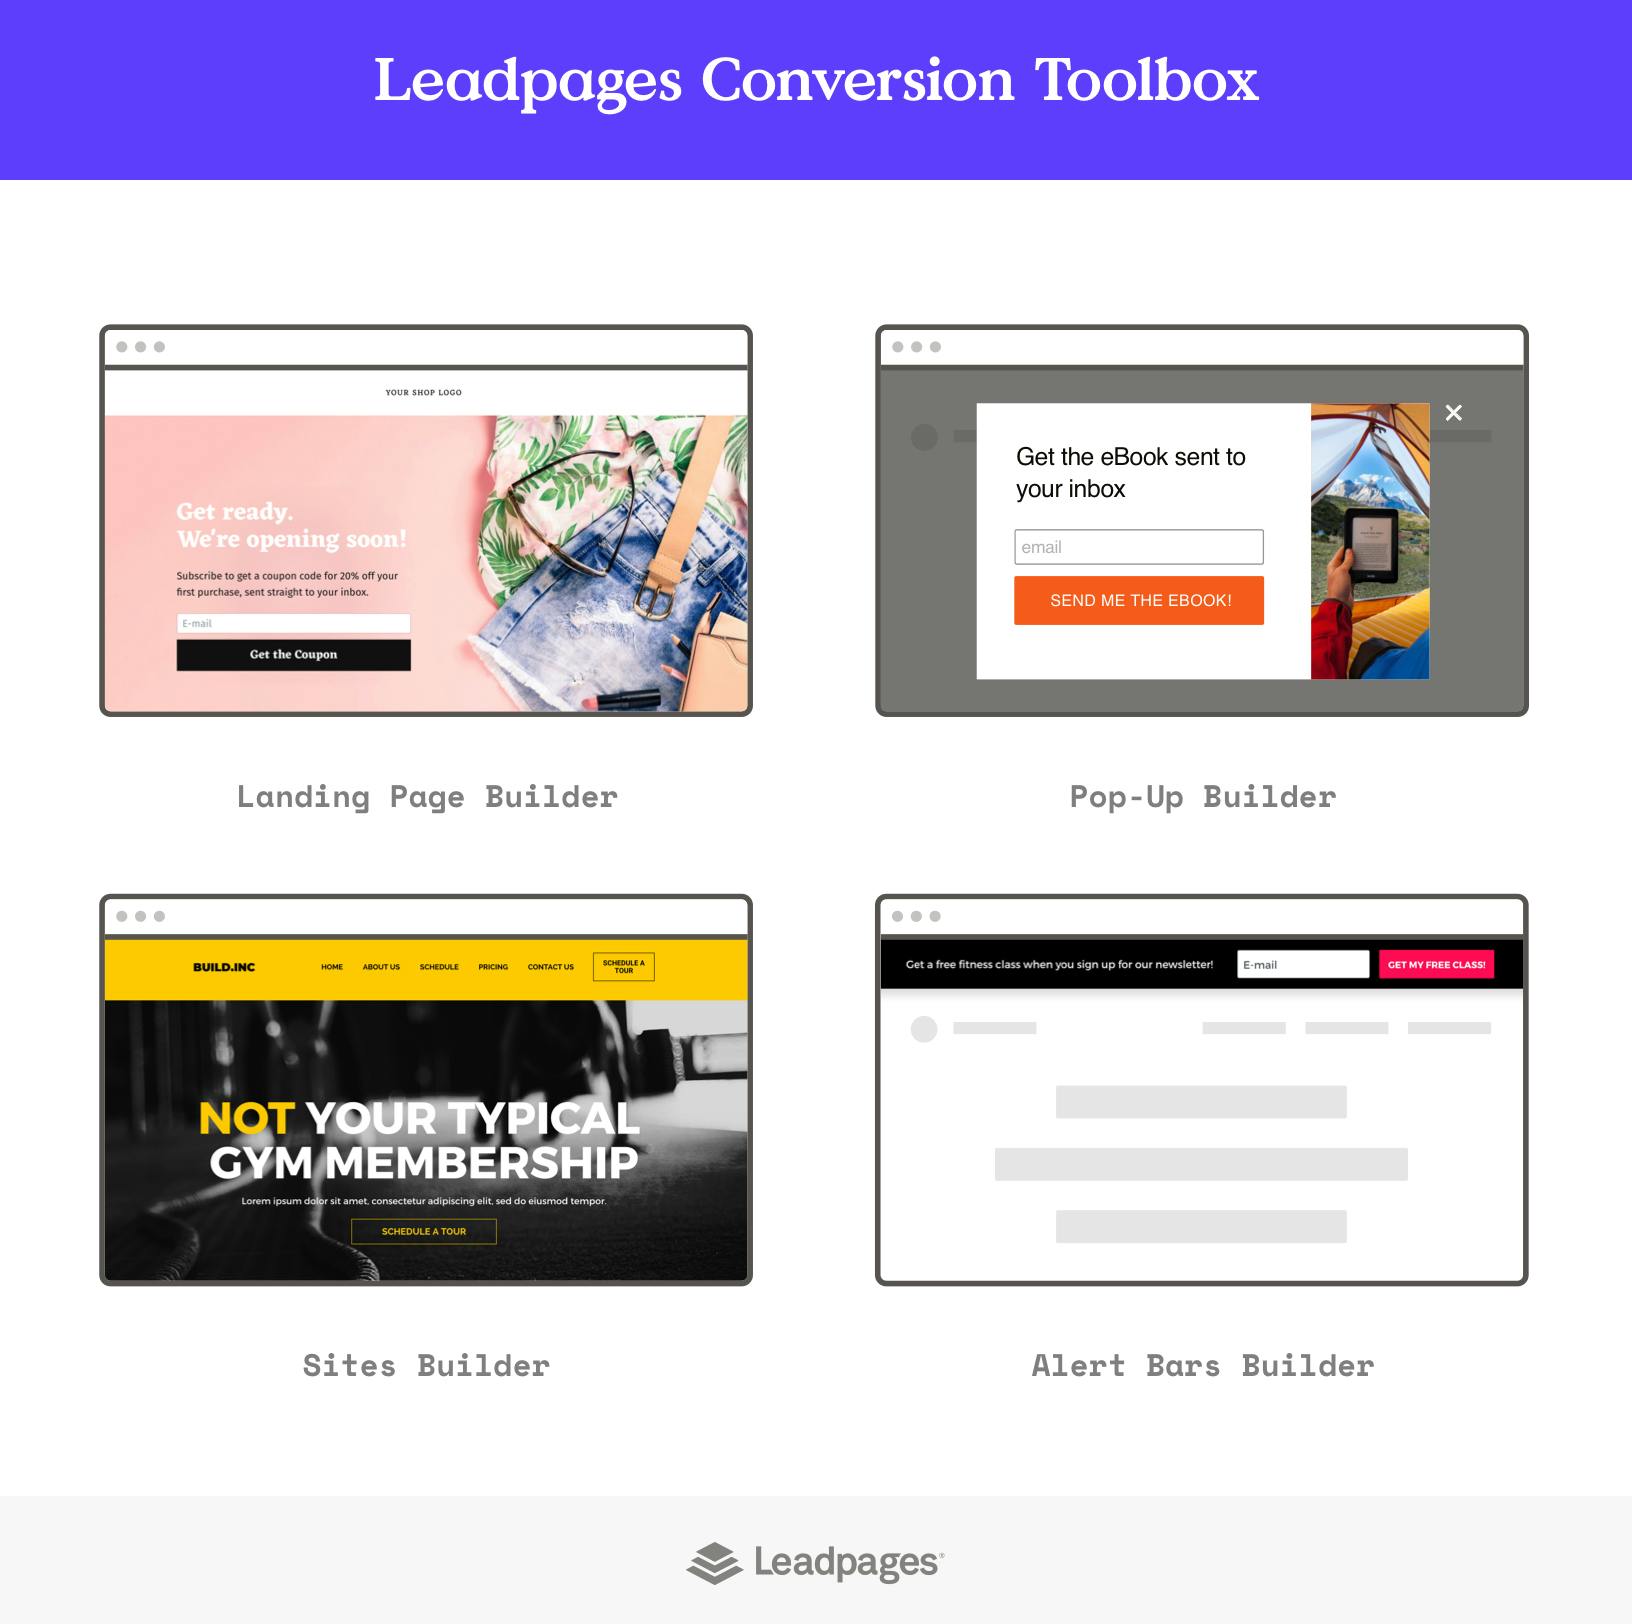 The leader Leadpages